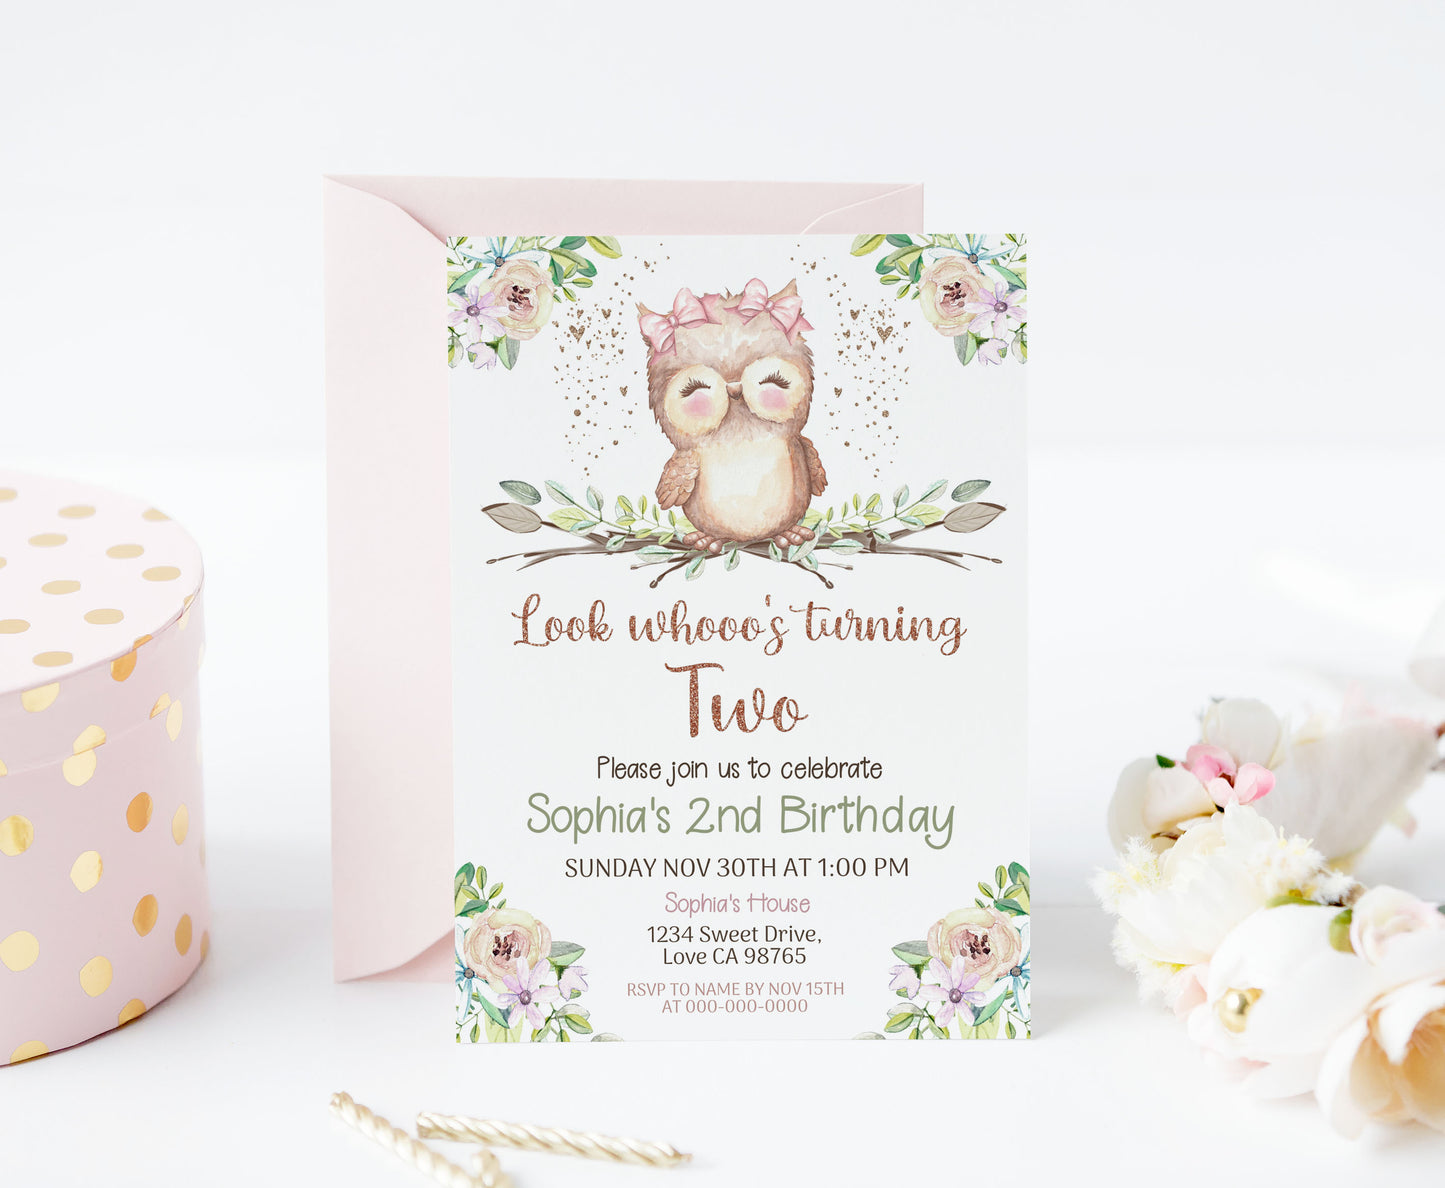 Look Whooo's Turning One Invitation | Owl Girl Birthday Party Invite- 78A